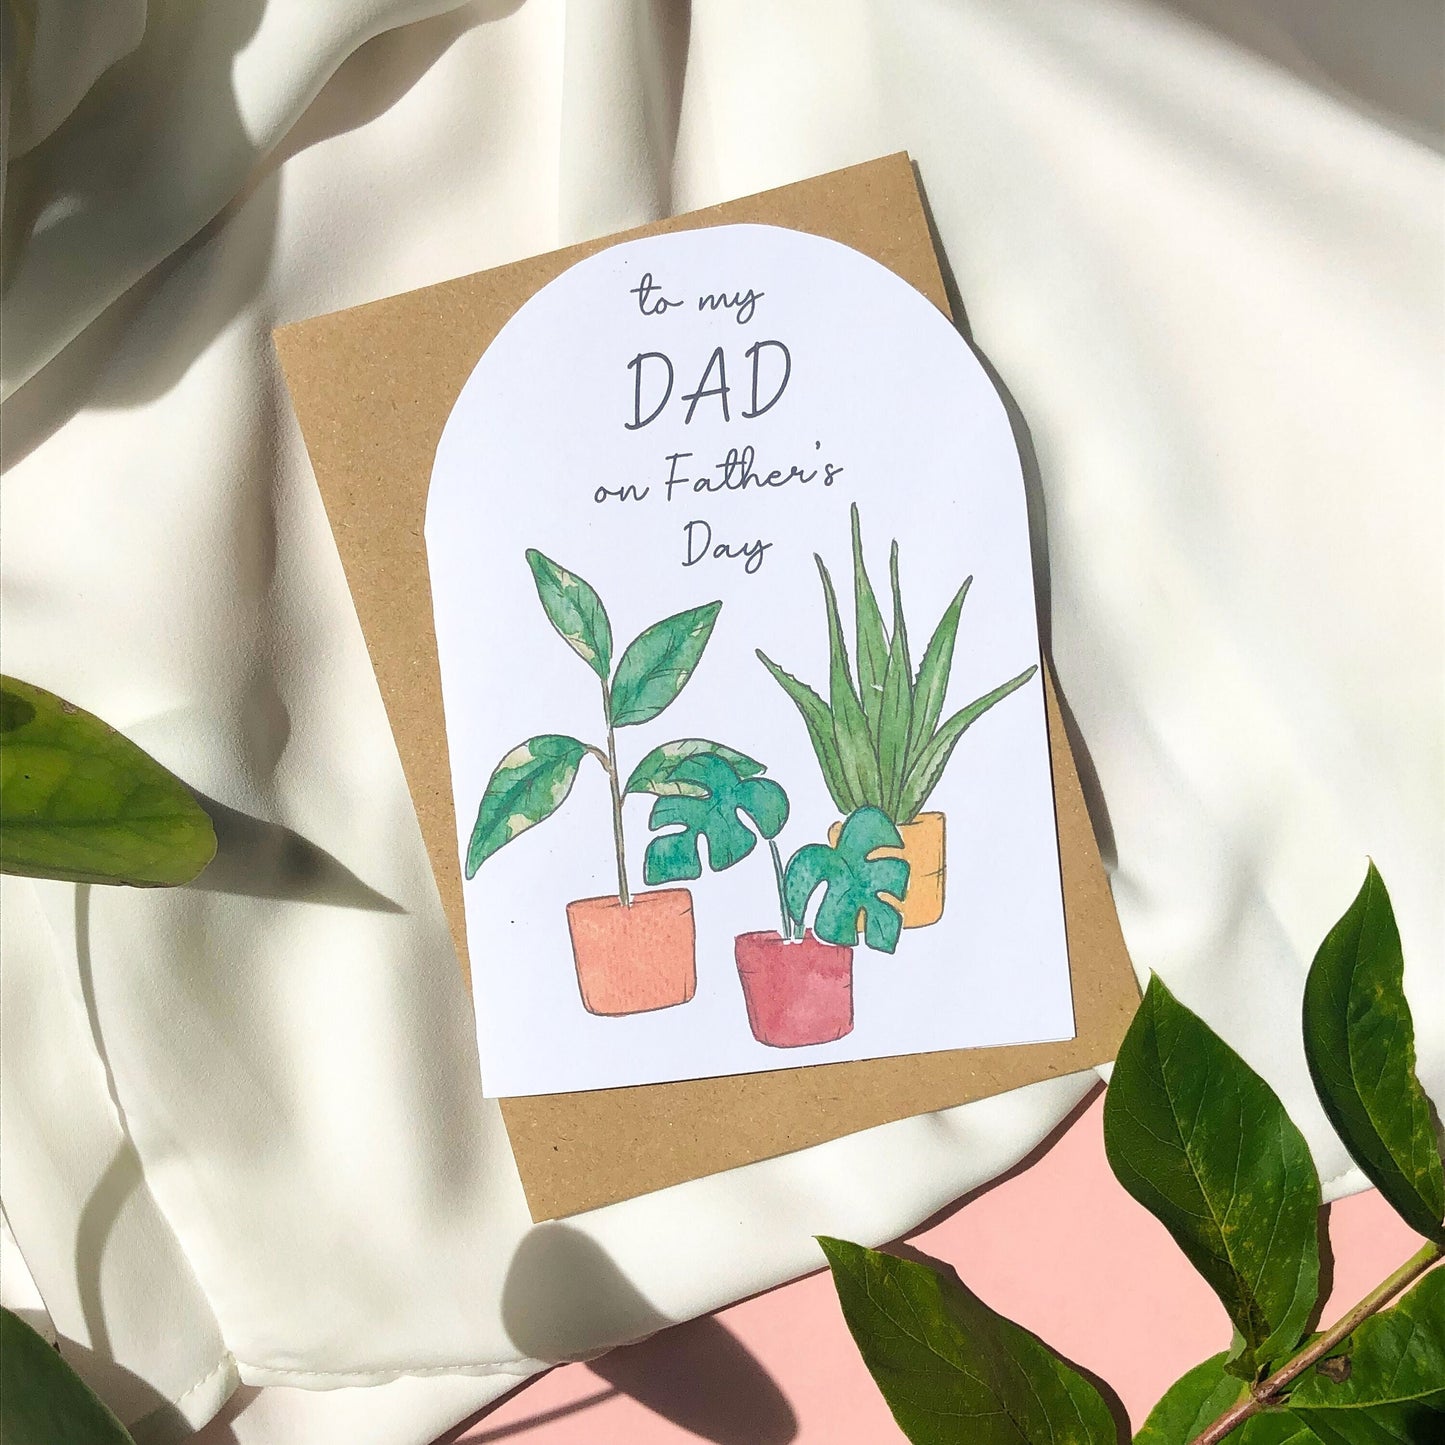 A Father's Day card displaying the words "DAD Happy Father's Day" above a collection of several house plants, each growing in a different coloured pot. The rich hues of the pots range from earthy green to bright orange and deep blue, complementing perfectly the vibrant green leaves of the plants. The card is an attractive and personal way to convey warm greetings and well wishes to a cherished dad on his special day.